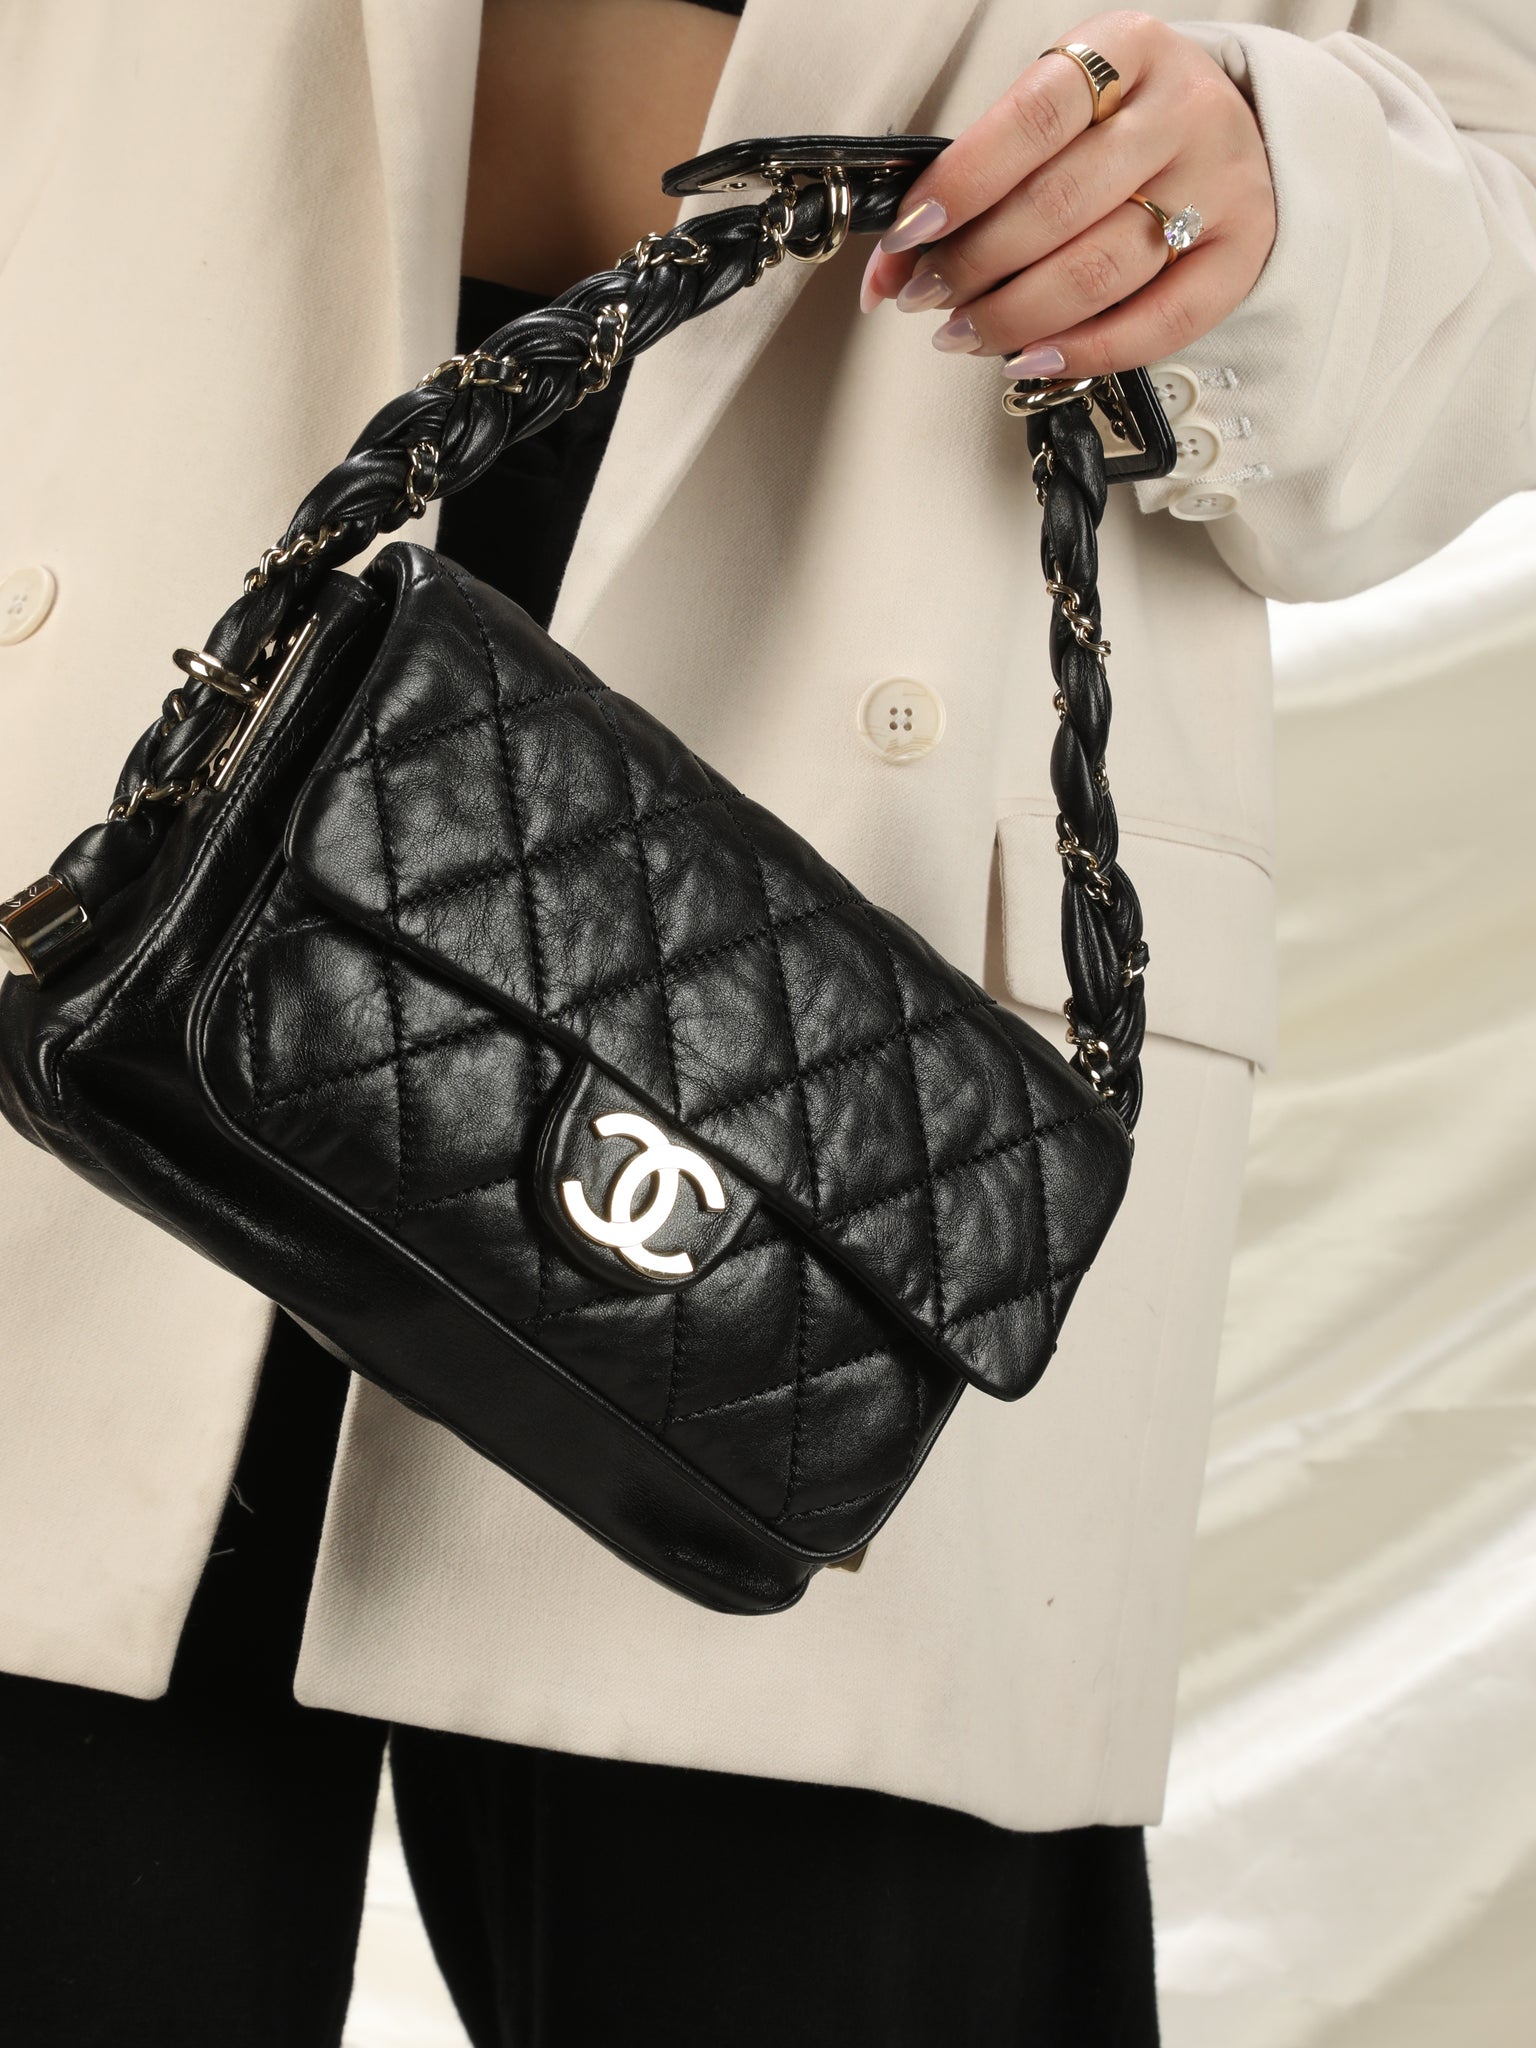 how much is a chanel lambskin flap bag